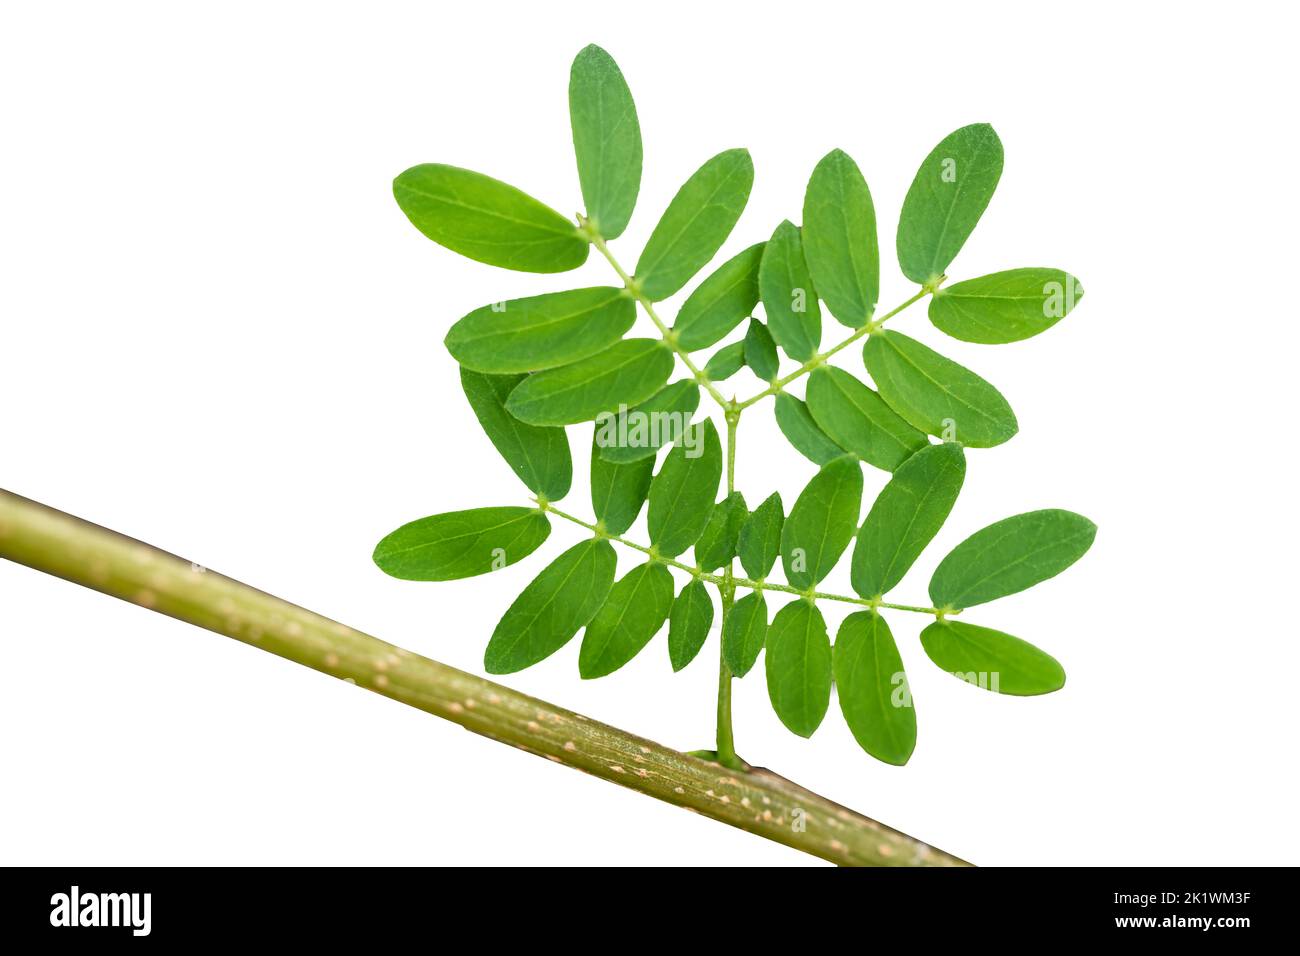 The leaves of the Leucaena leucocephala plant are small green in size attached to the stem, isolated on a white background Stock Photo